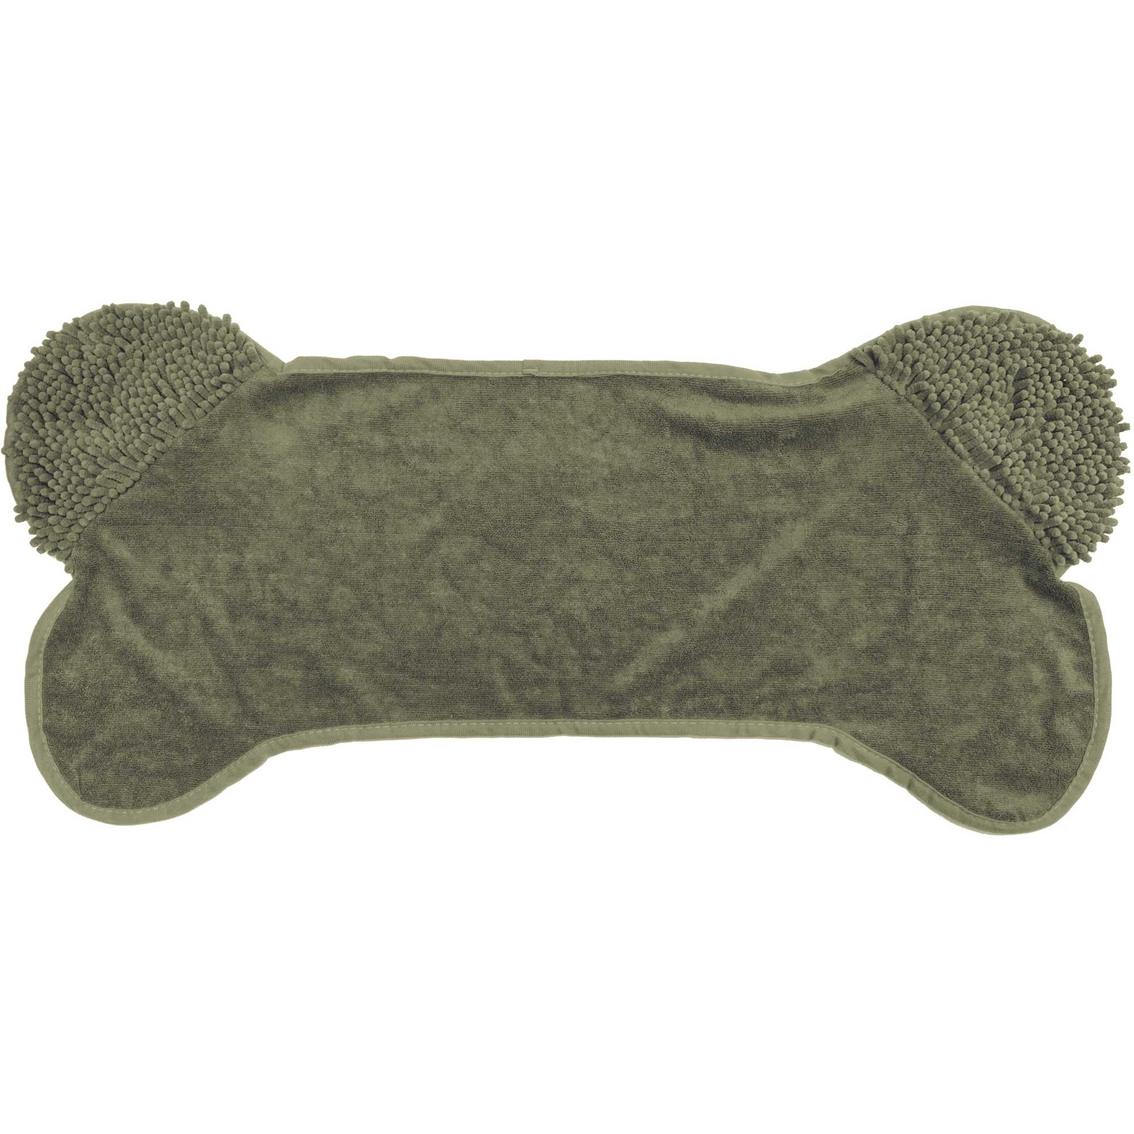 Spot Clean Paws Towel 30 x 16 in. - Image 3 of 4